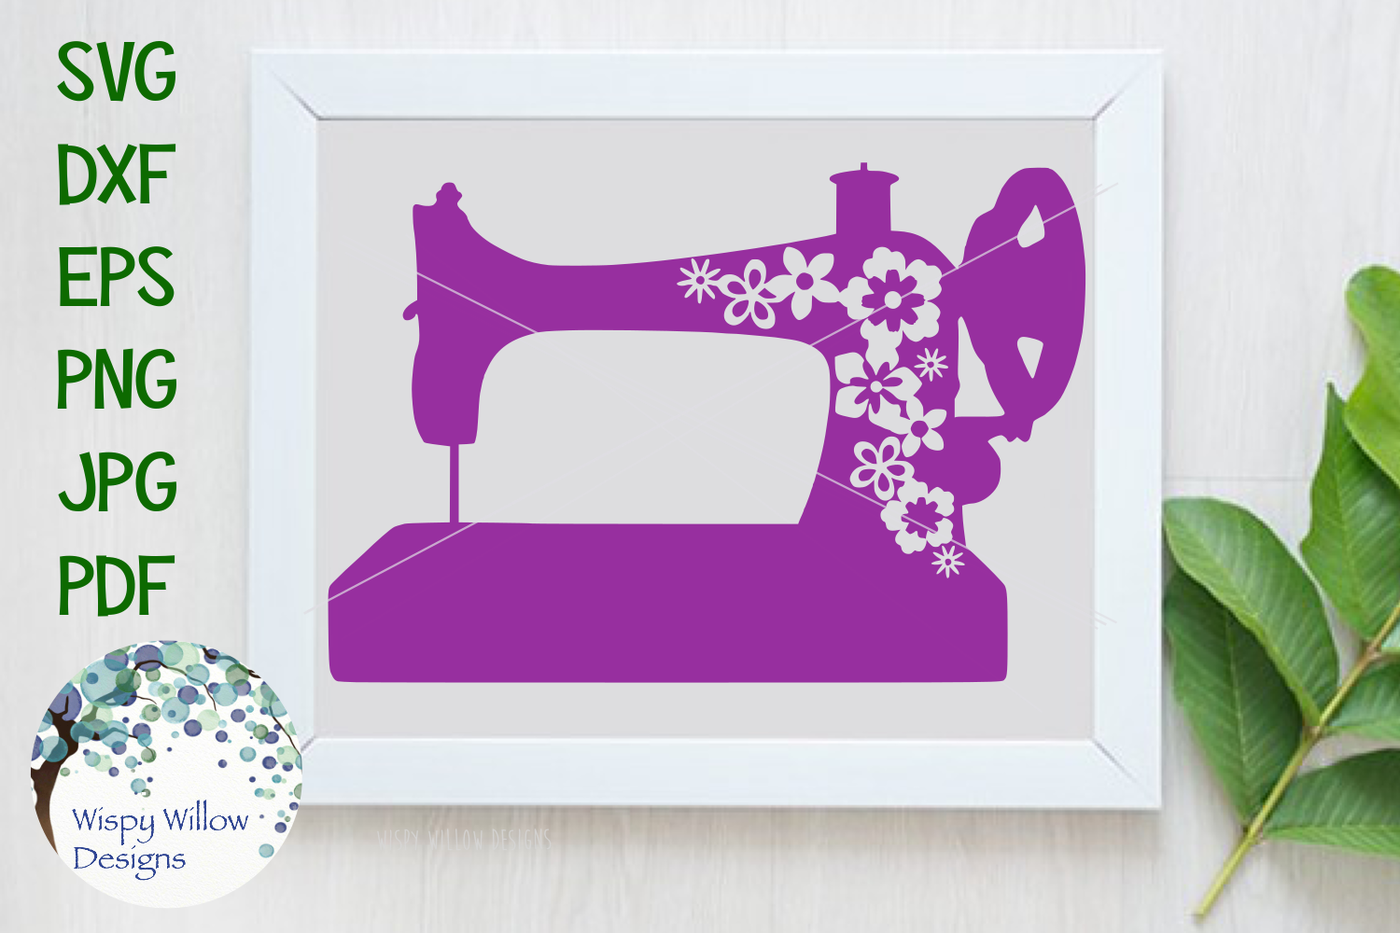 Download Floral Vintage Sewing Machine SVG/DXF/EPS/PNG/JPG/PDF By Wispy Willow Designs | TheHungryJPEG.com